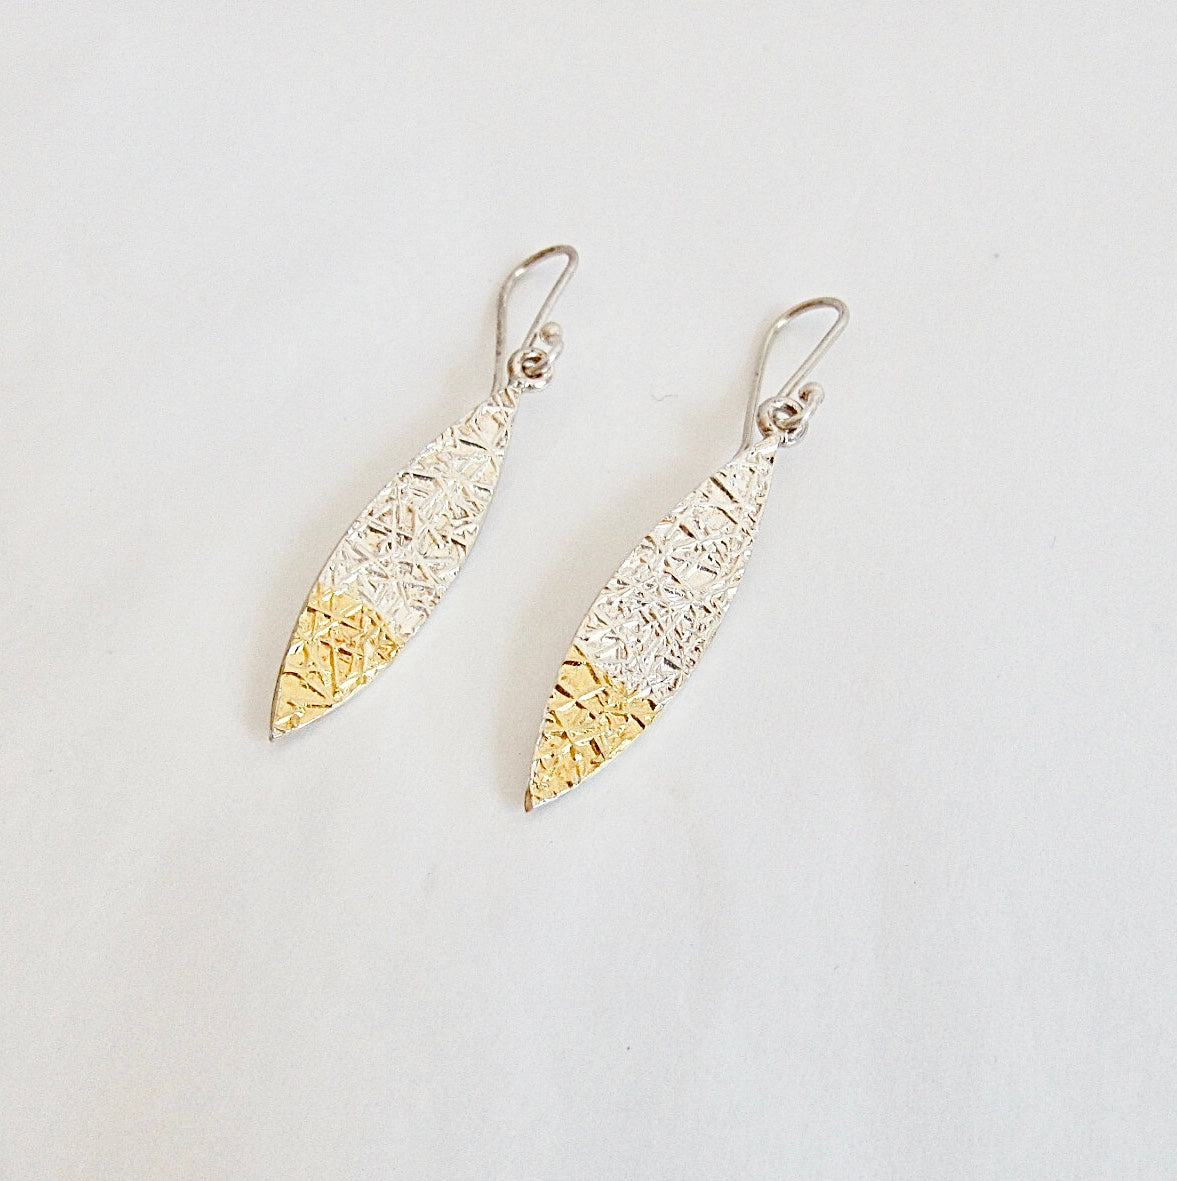 Leaf textured Earrings- Sterling silver and gold